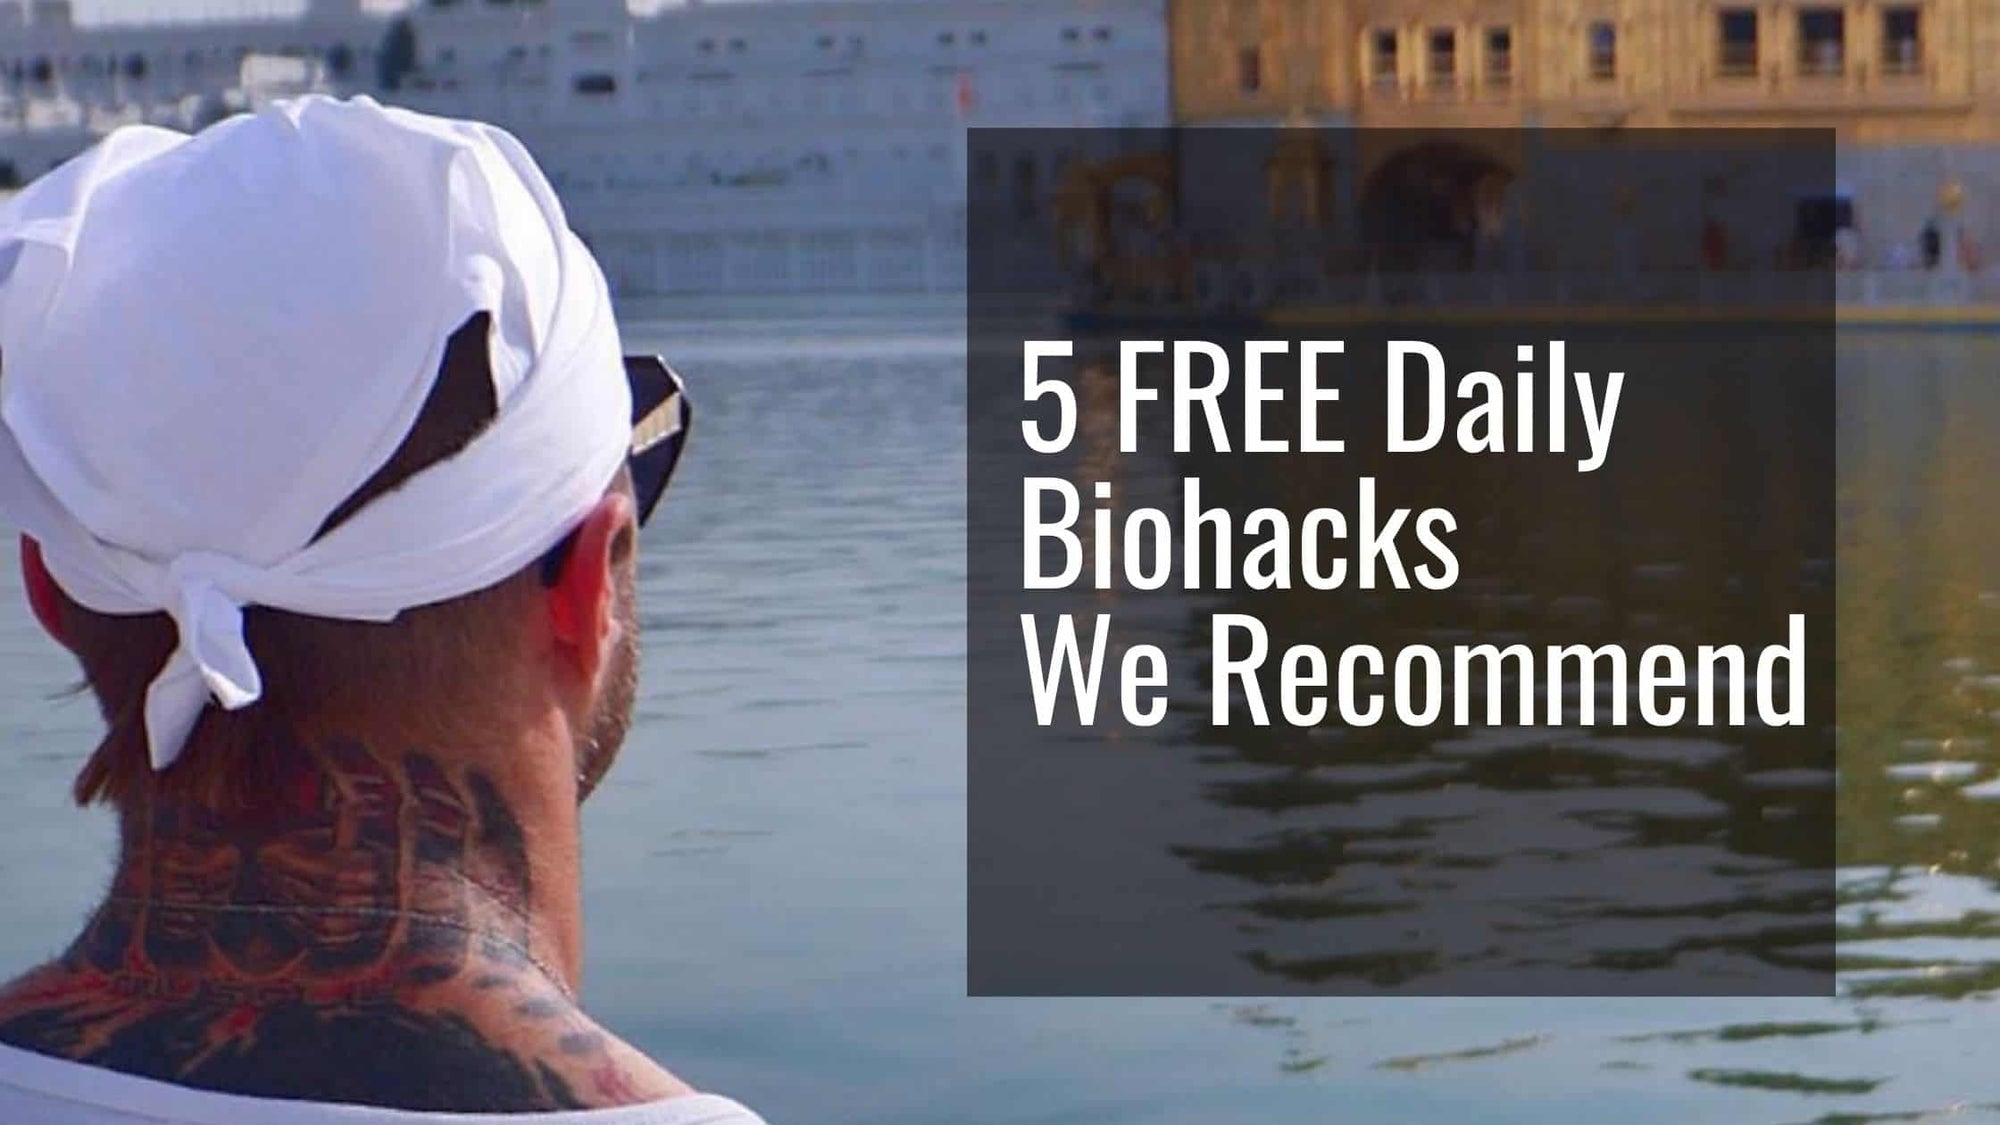 5 FREE Daily Biohacks We Recommend